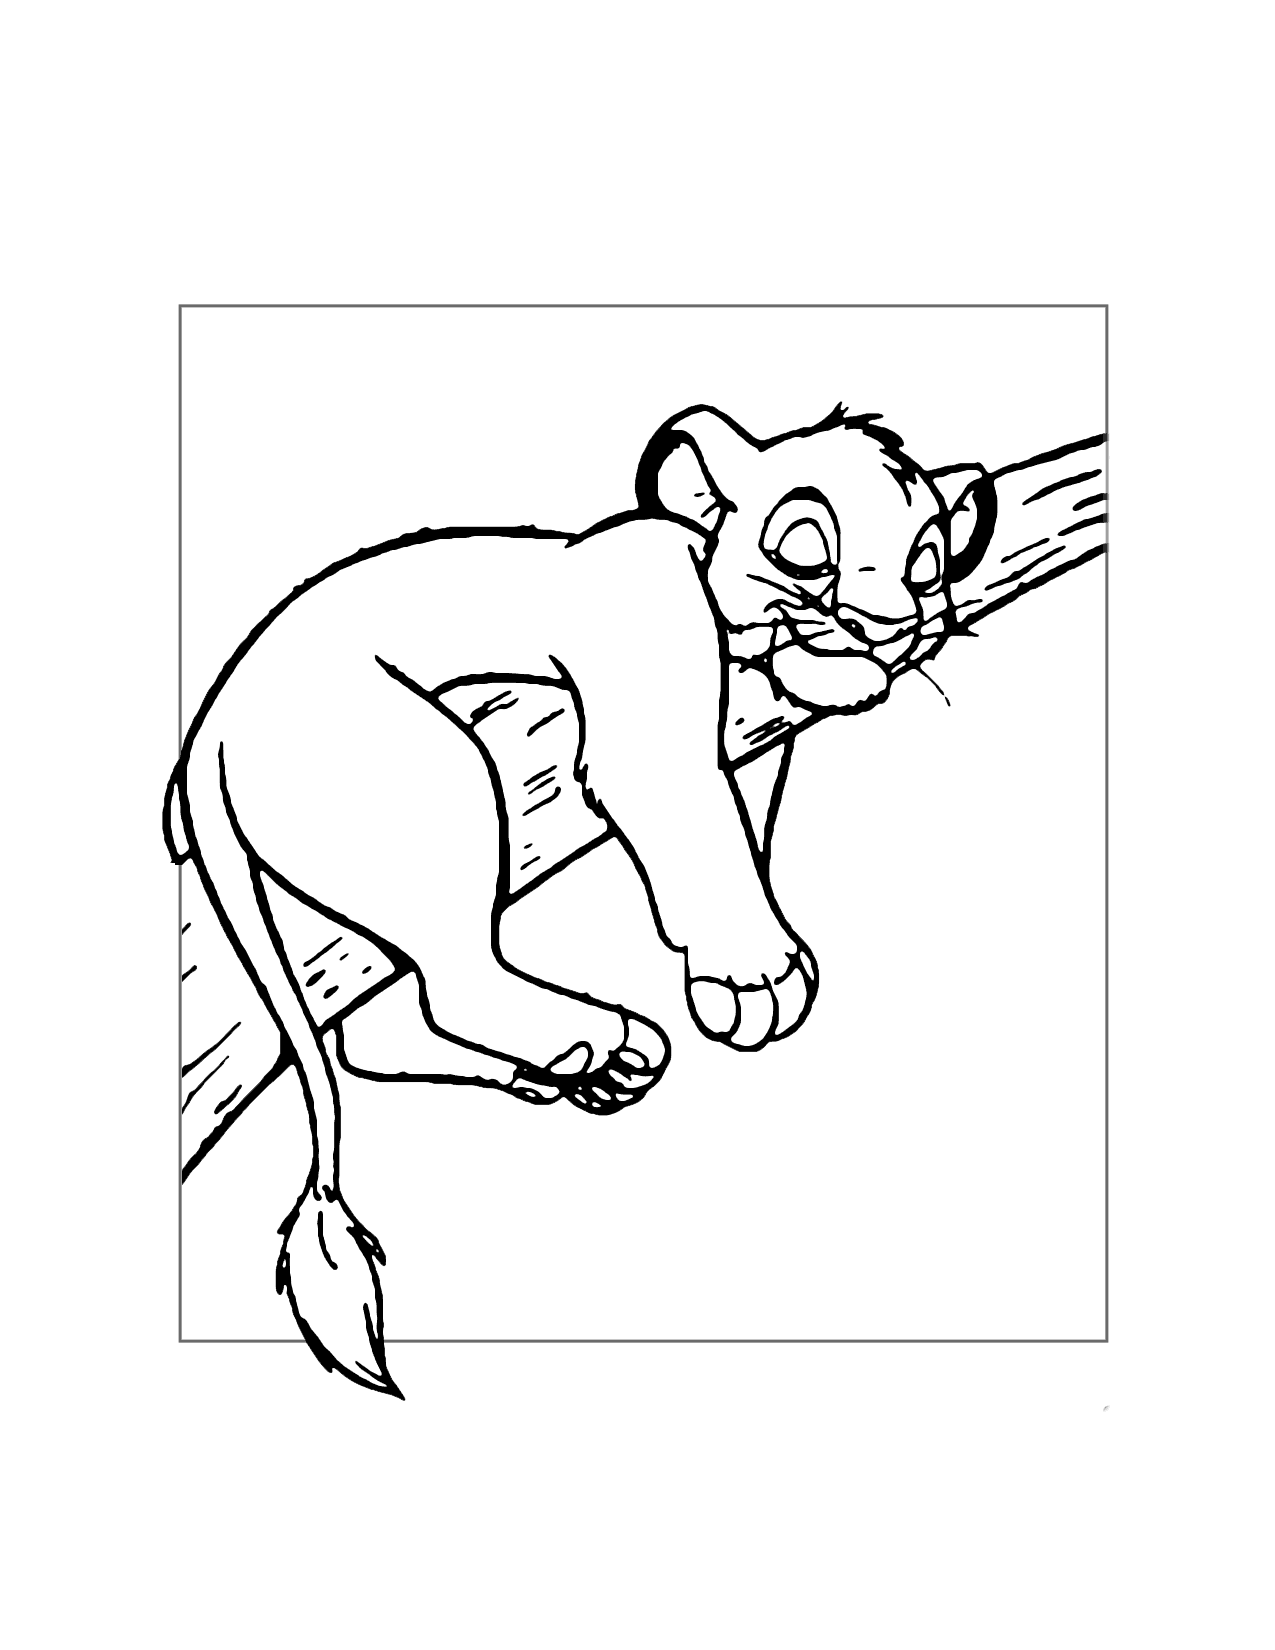 Simba Sleeps In A Tree Coloring Page